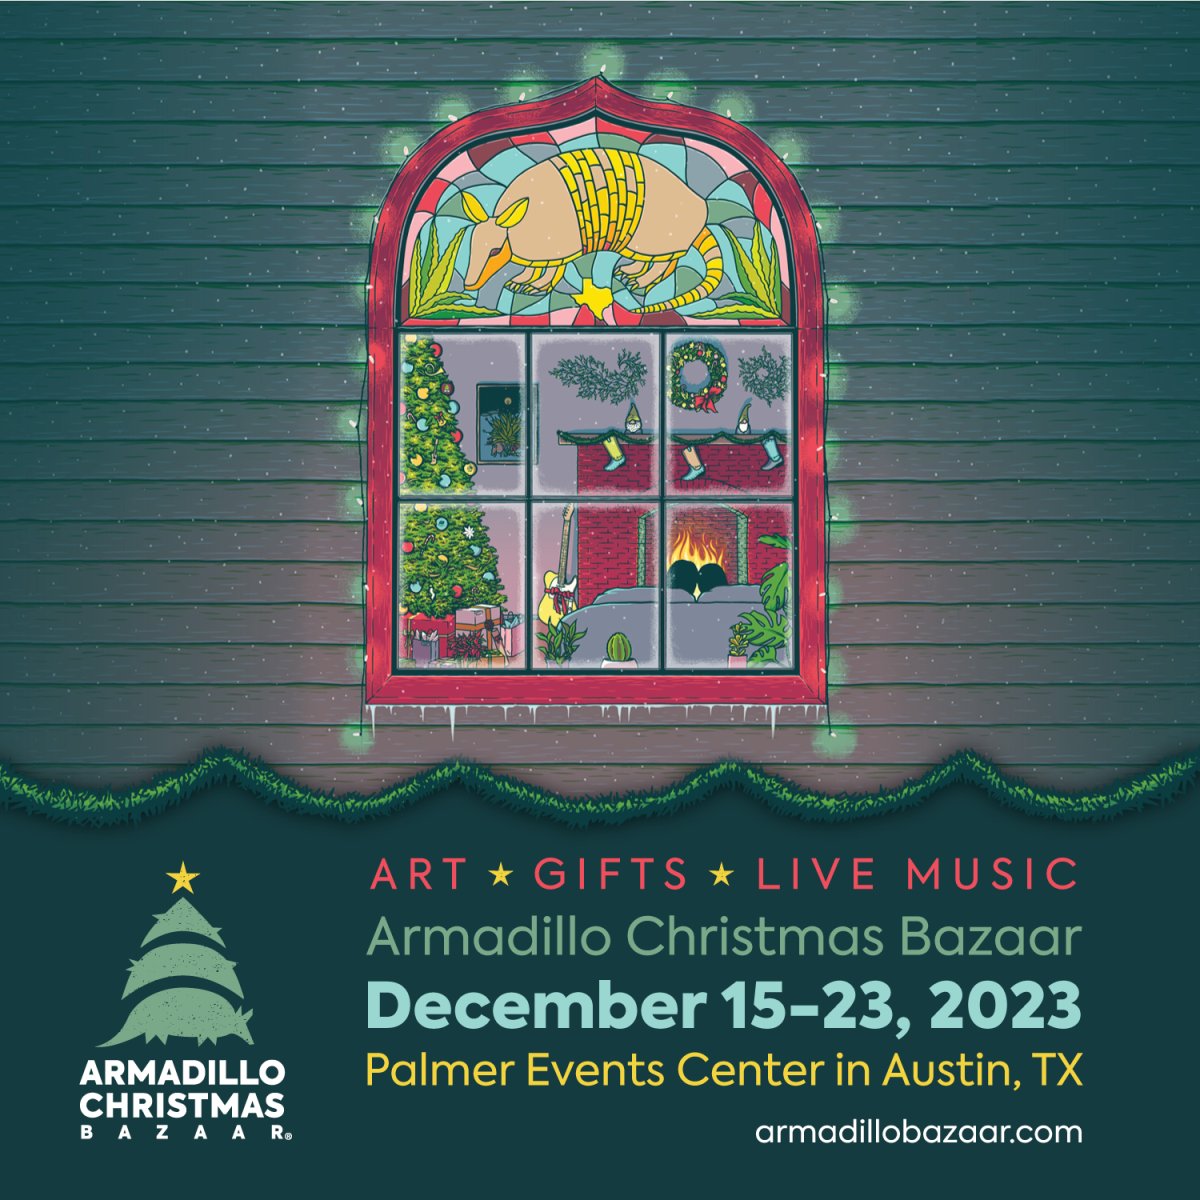 Find the perfect gifts and embrace the festive spirit at the Armadillo Christmas Bazaar!🎉🎁 

#ArmadilloBazaar #HolidayShopping #FestiveFinds #HolidayMagic #FestiveFun #Christmas #festivevibes #Festive #Holidays #holidayseason #modernrootsrealtygroup